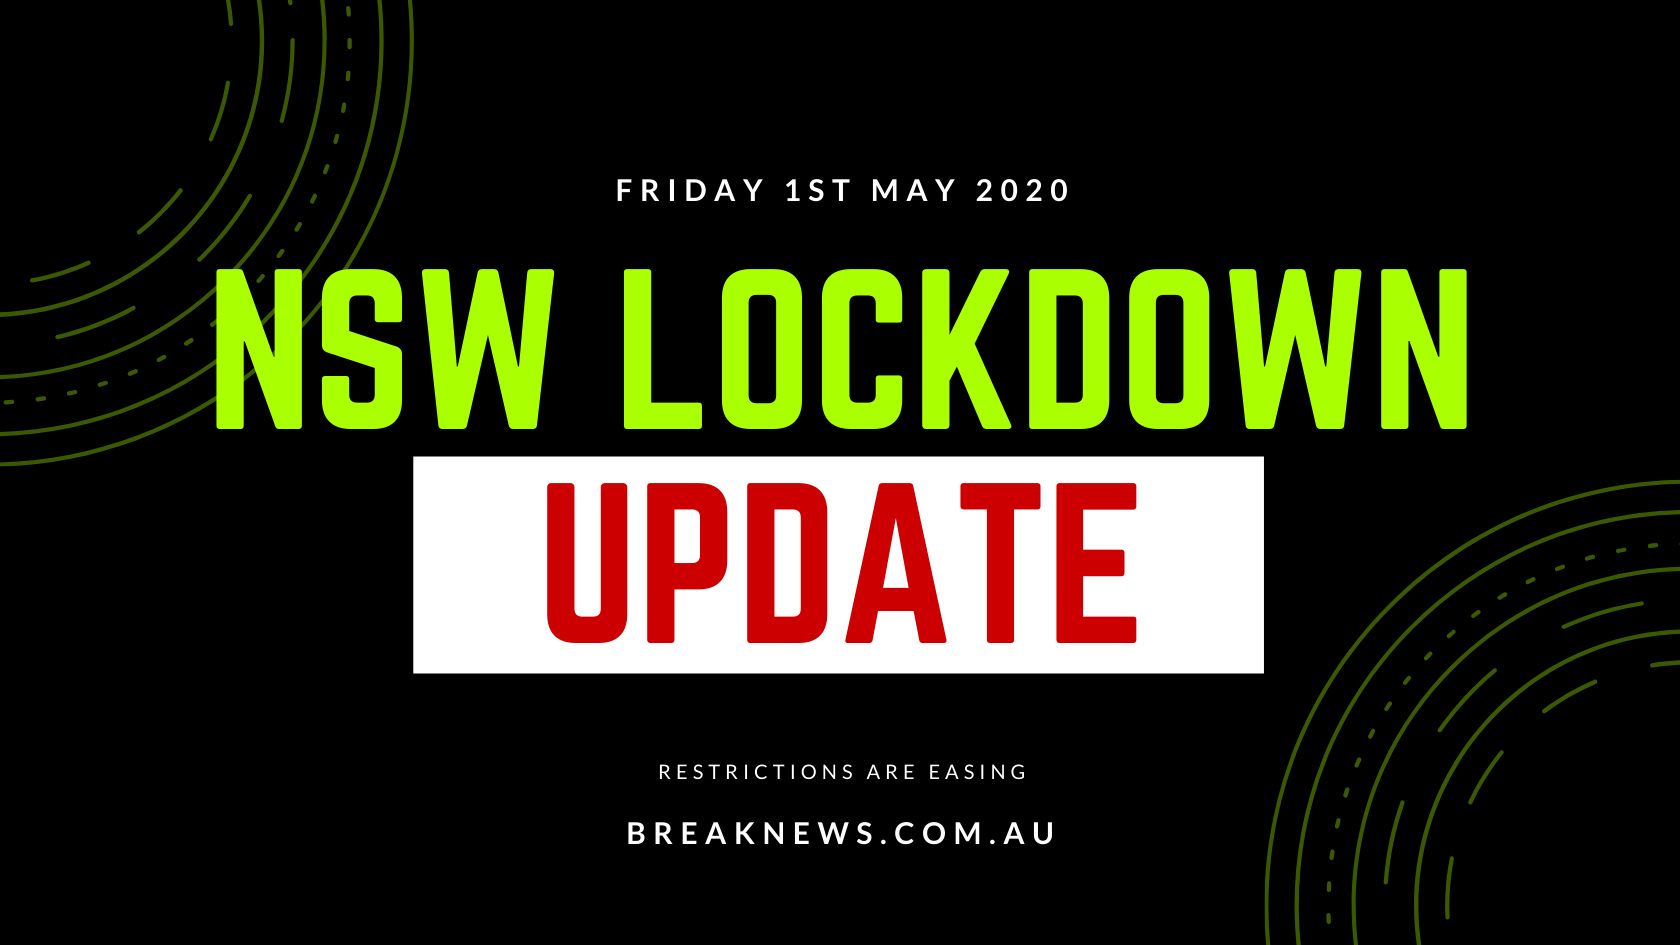 lockdown nsw lifted